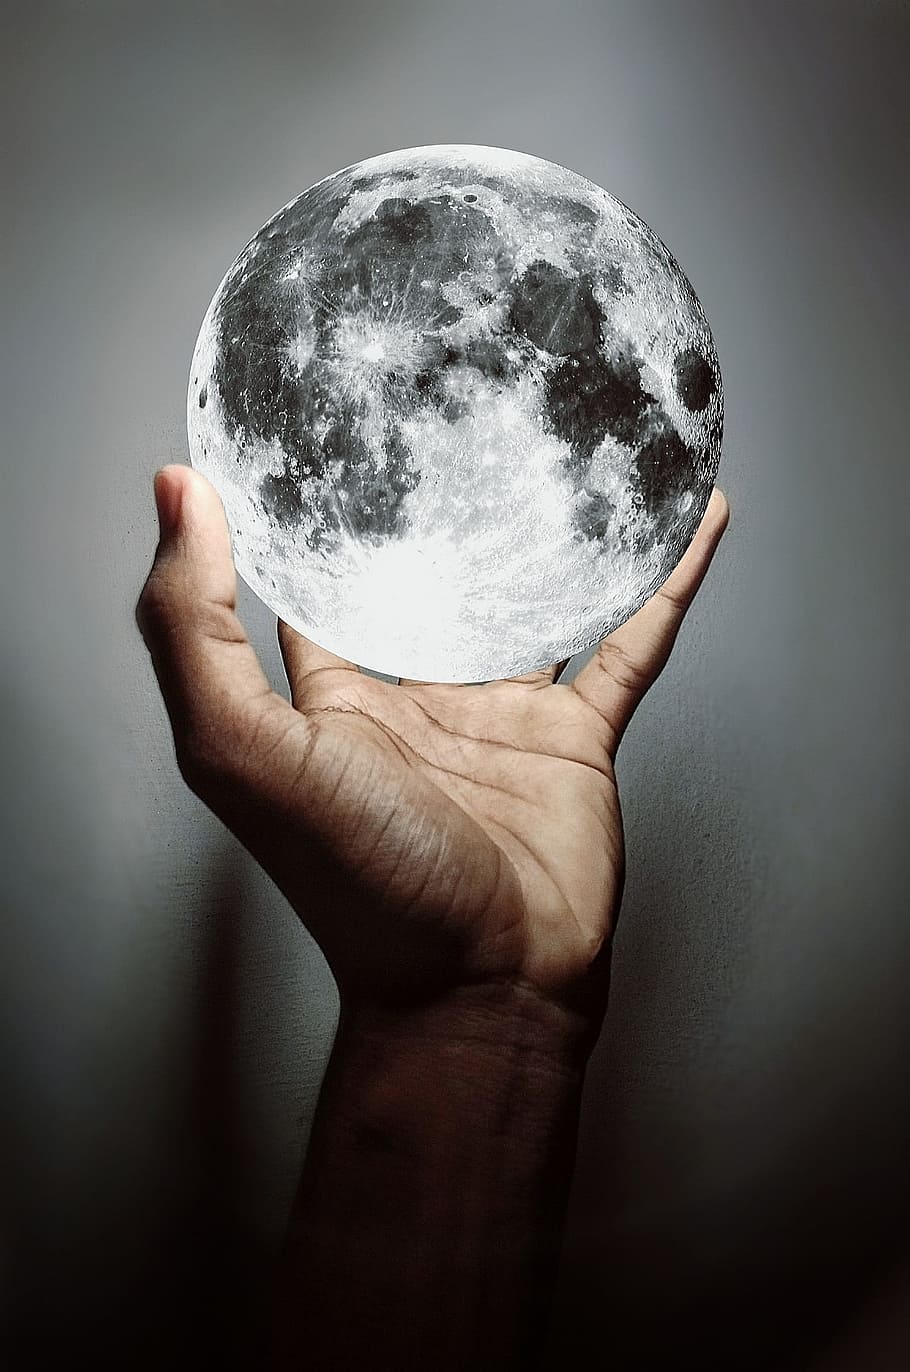 moon, hand, catching the moon, darkness, spherical, adult, human hand, human body part, holding, sphere